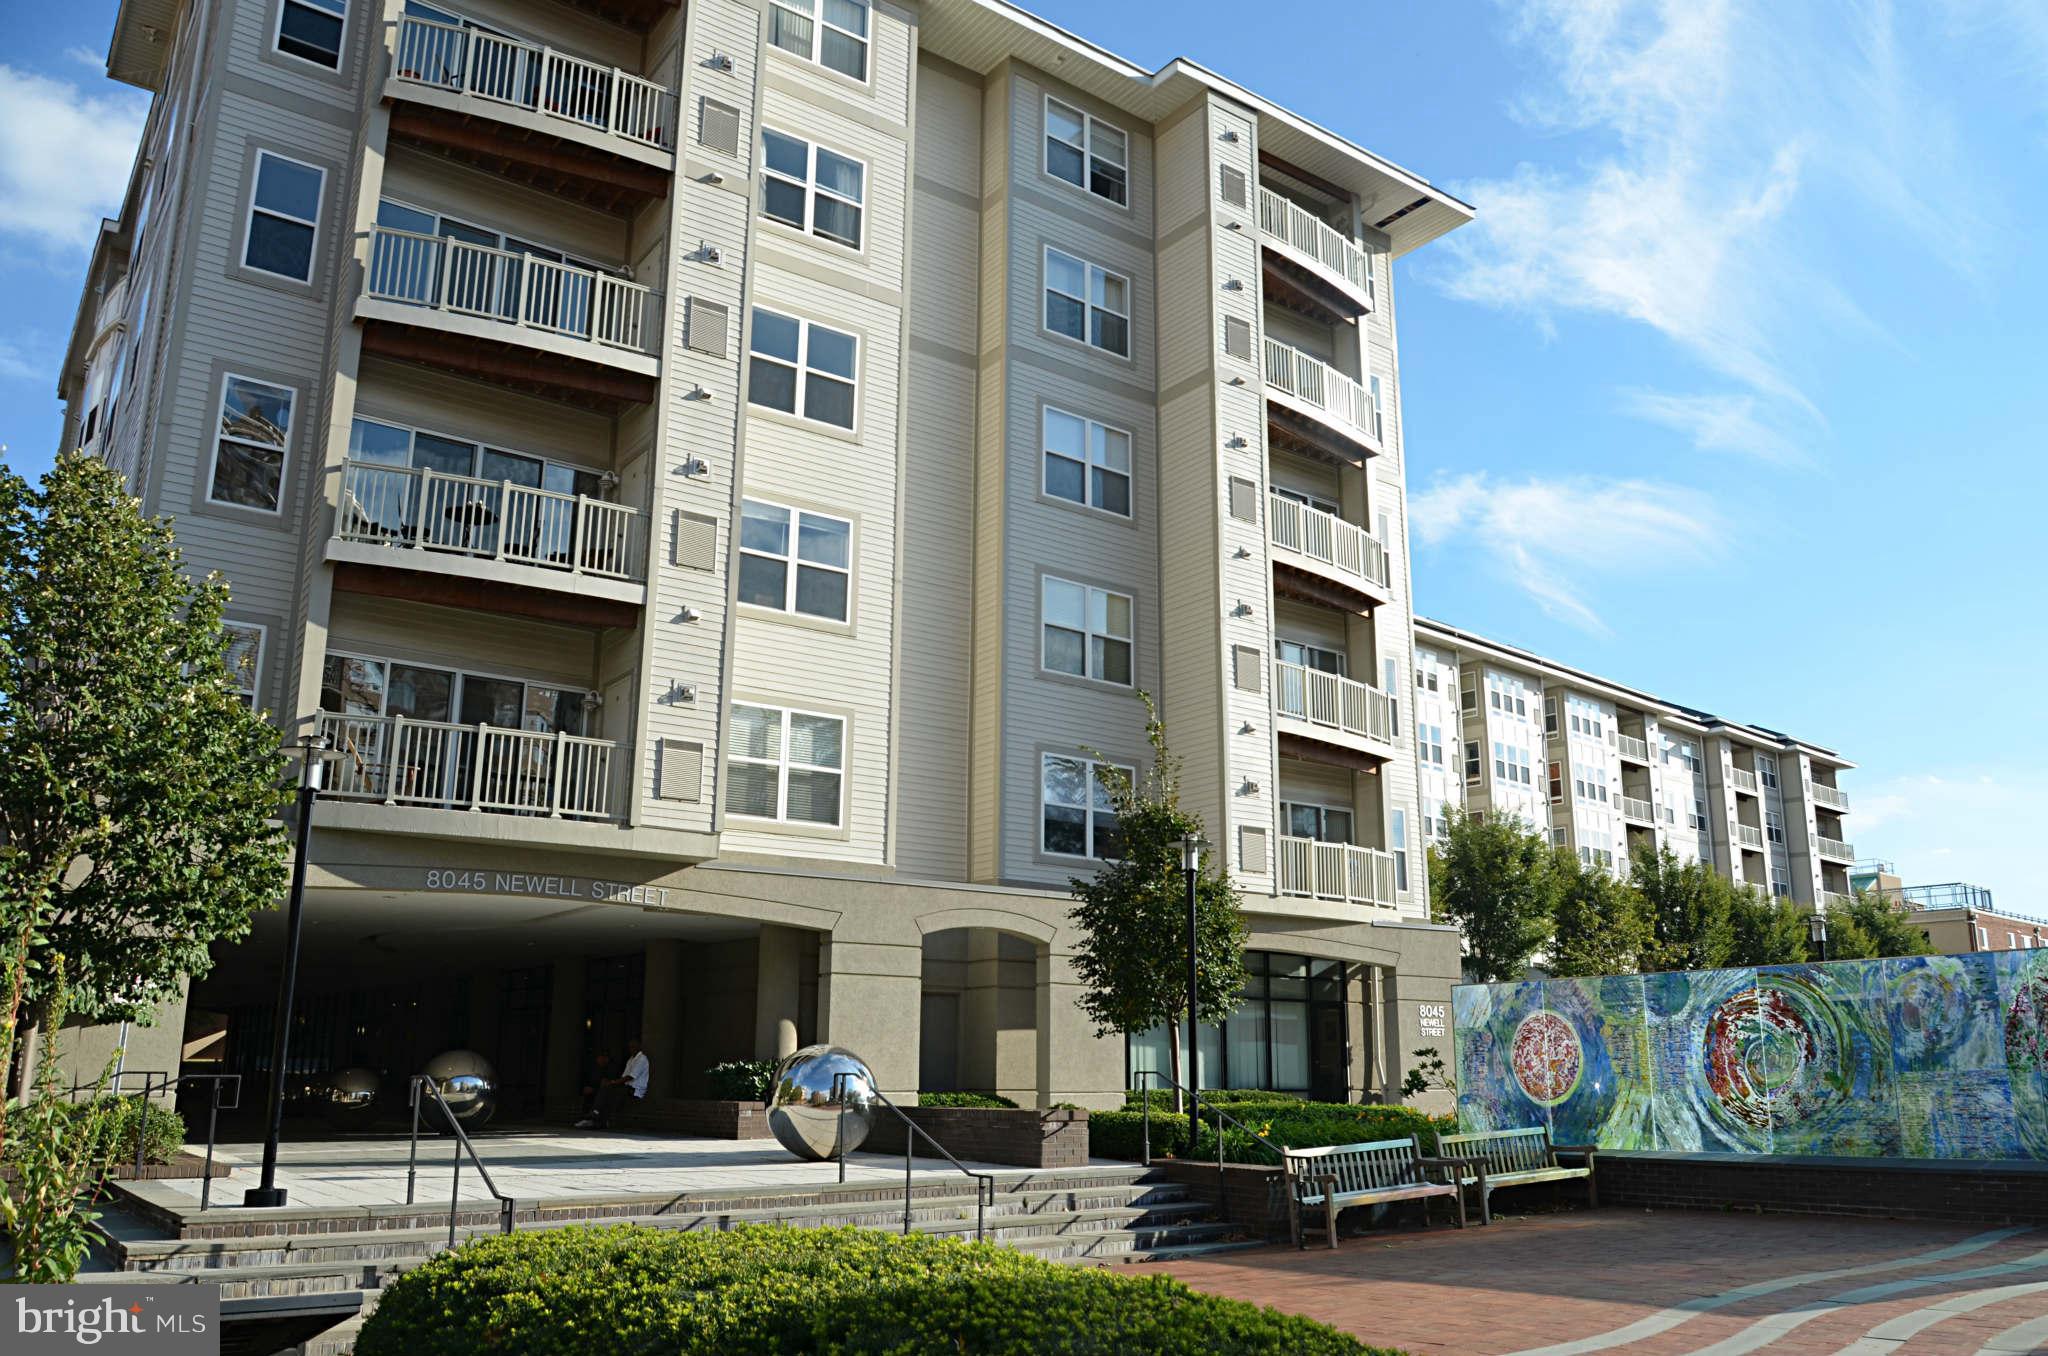 a front view of multi story residential apartment building with yard and retail shops